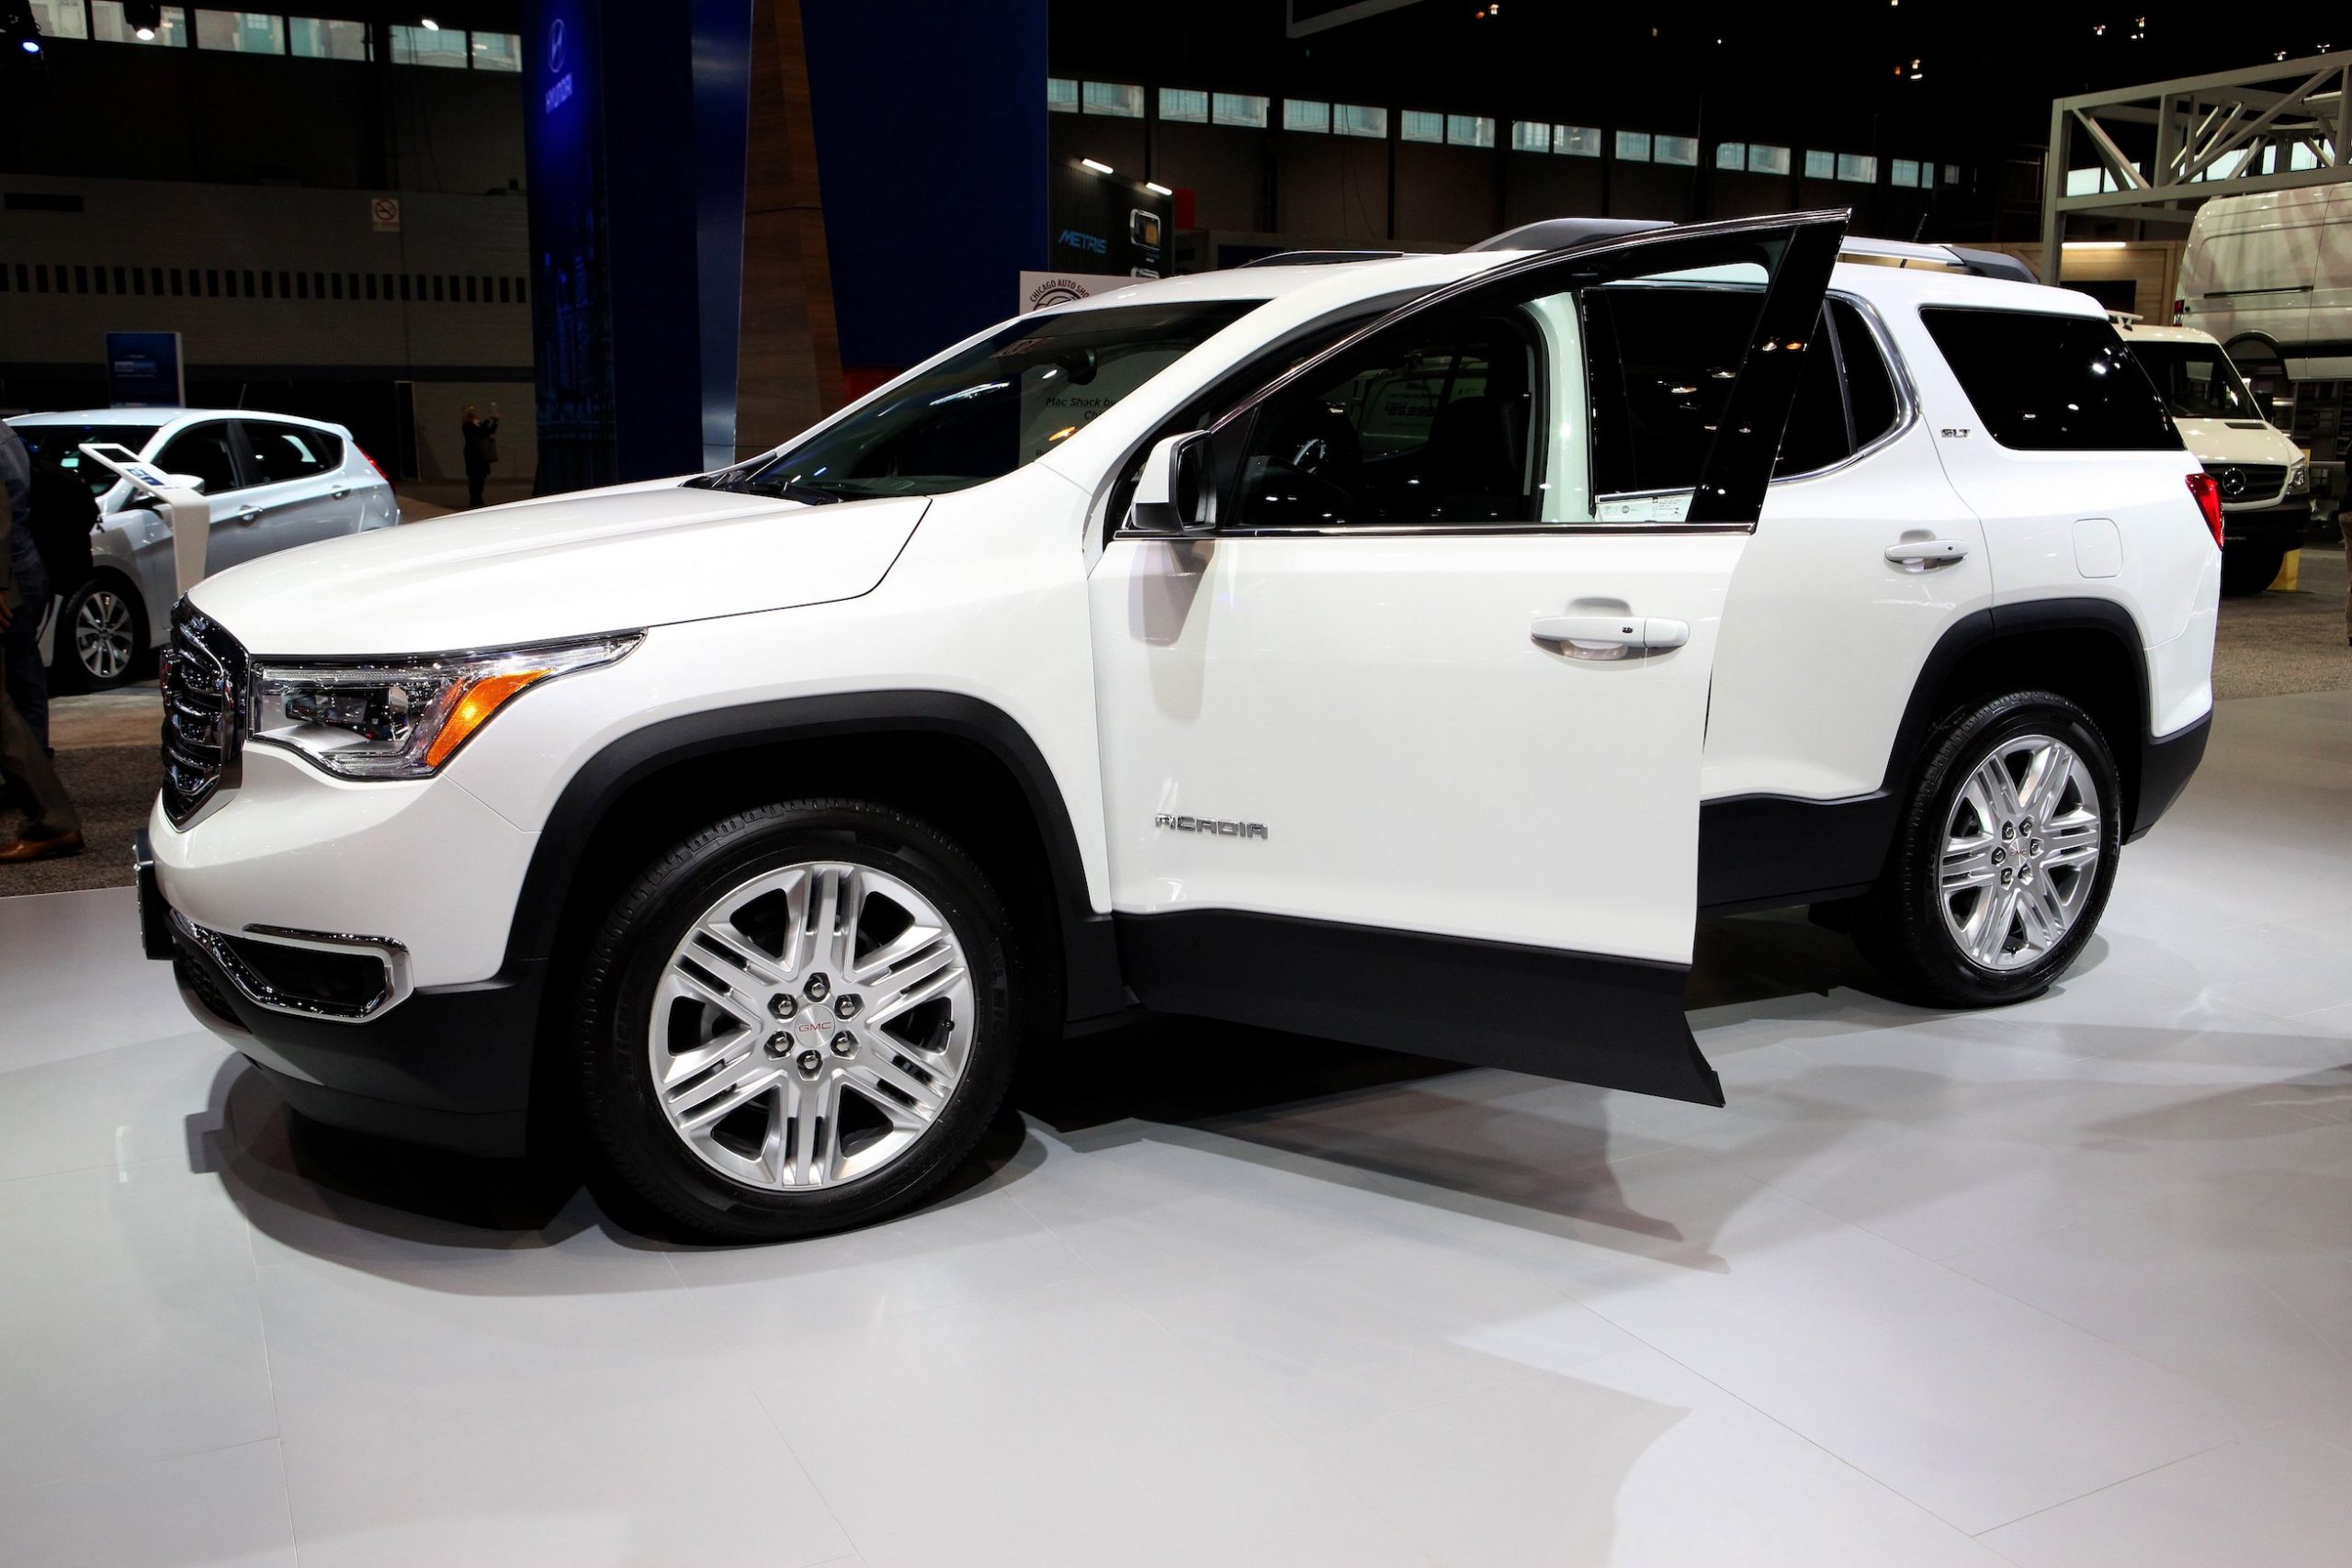 2017 GMC Acadia is on display at the 109th Annual Chicago Auto Show at McCormick Place